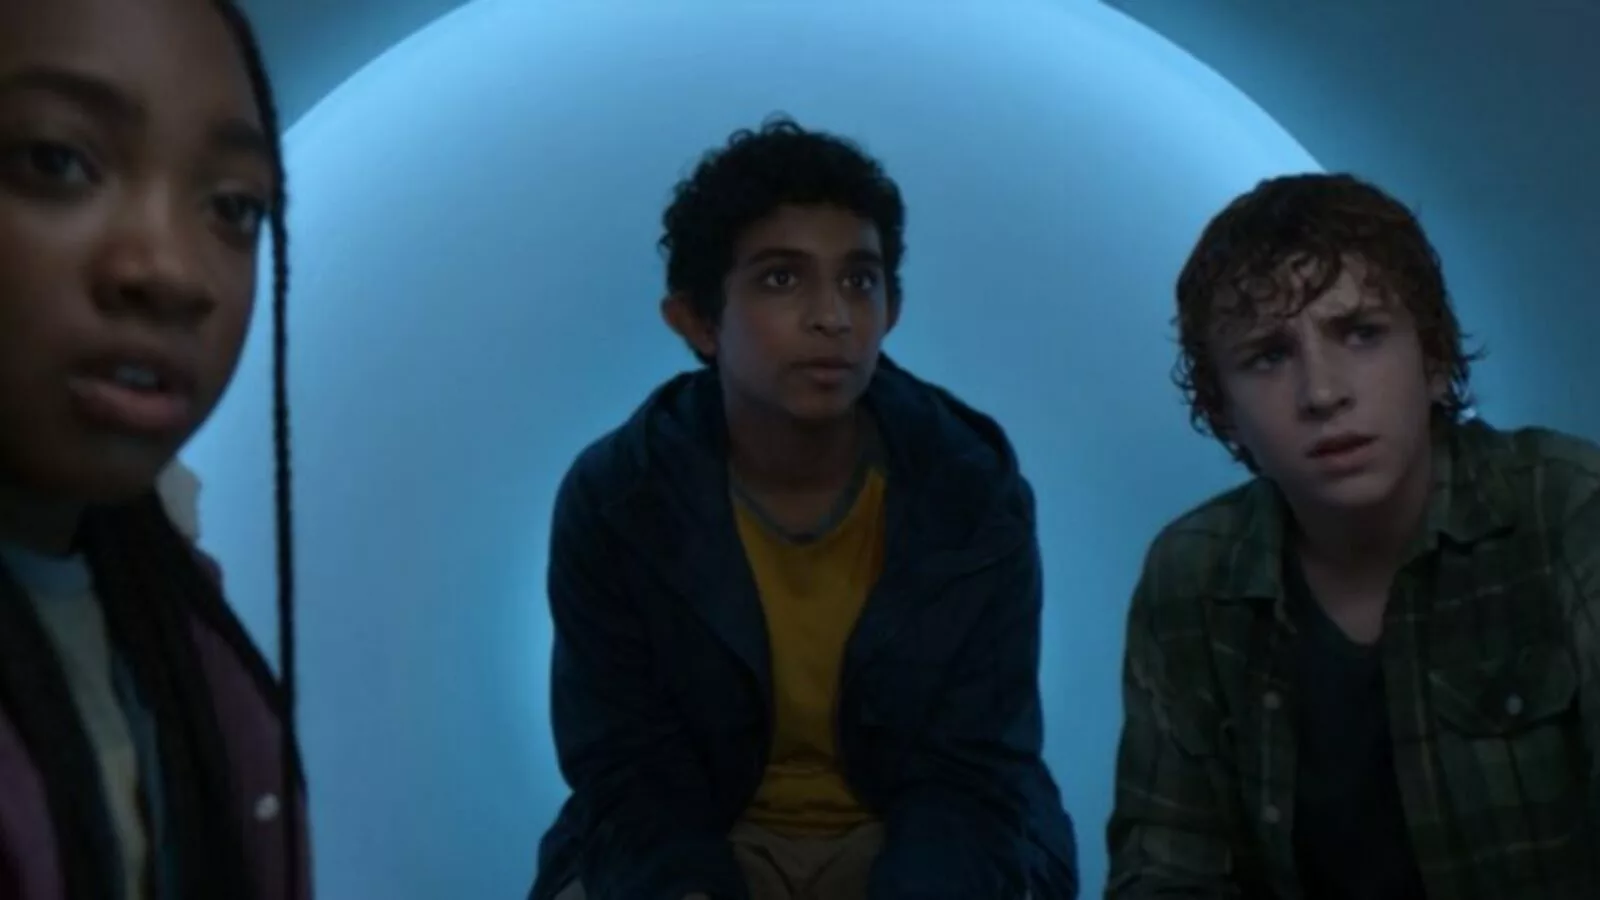 Percy Jackson and the Olympians Season 1, Episode 4 Review